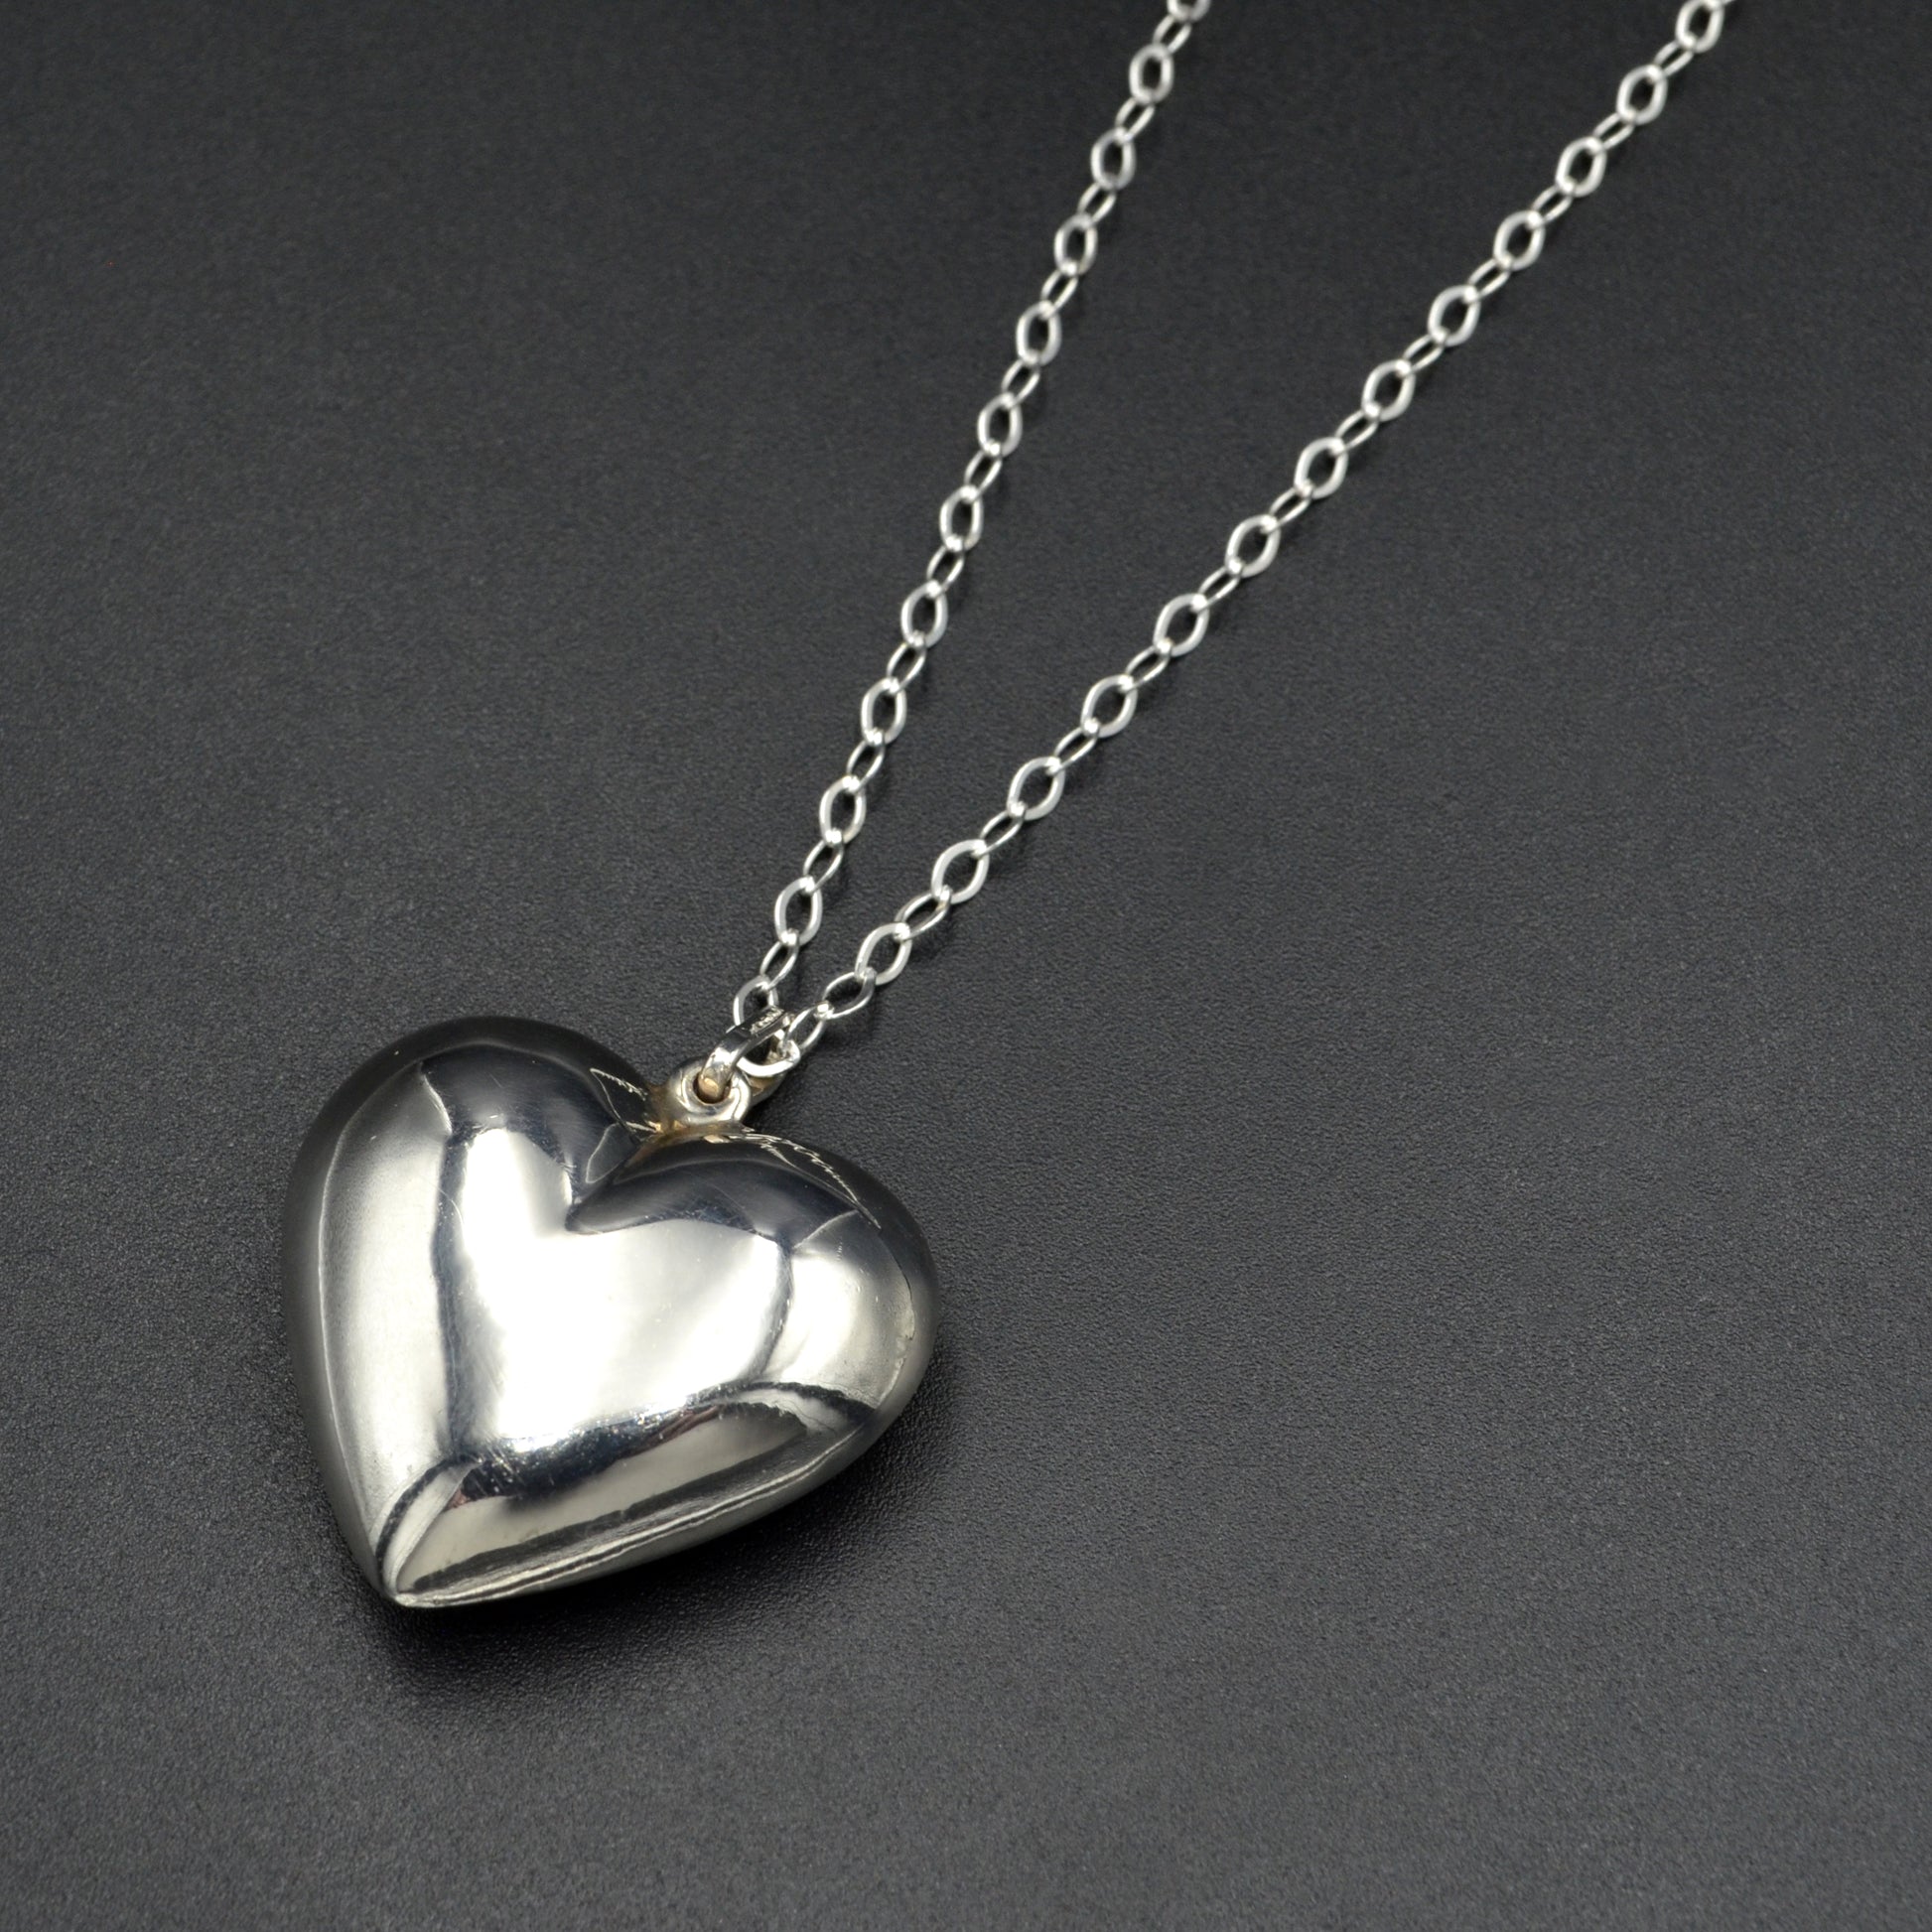 Vintage Puffed Silver Heart Pendant Necklace